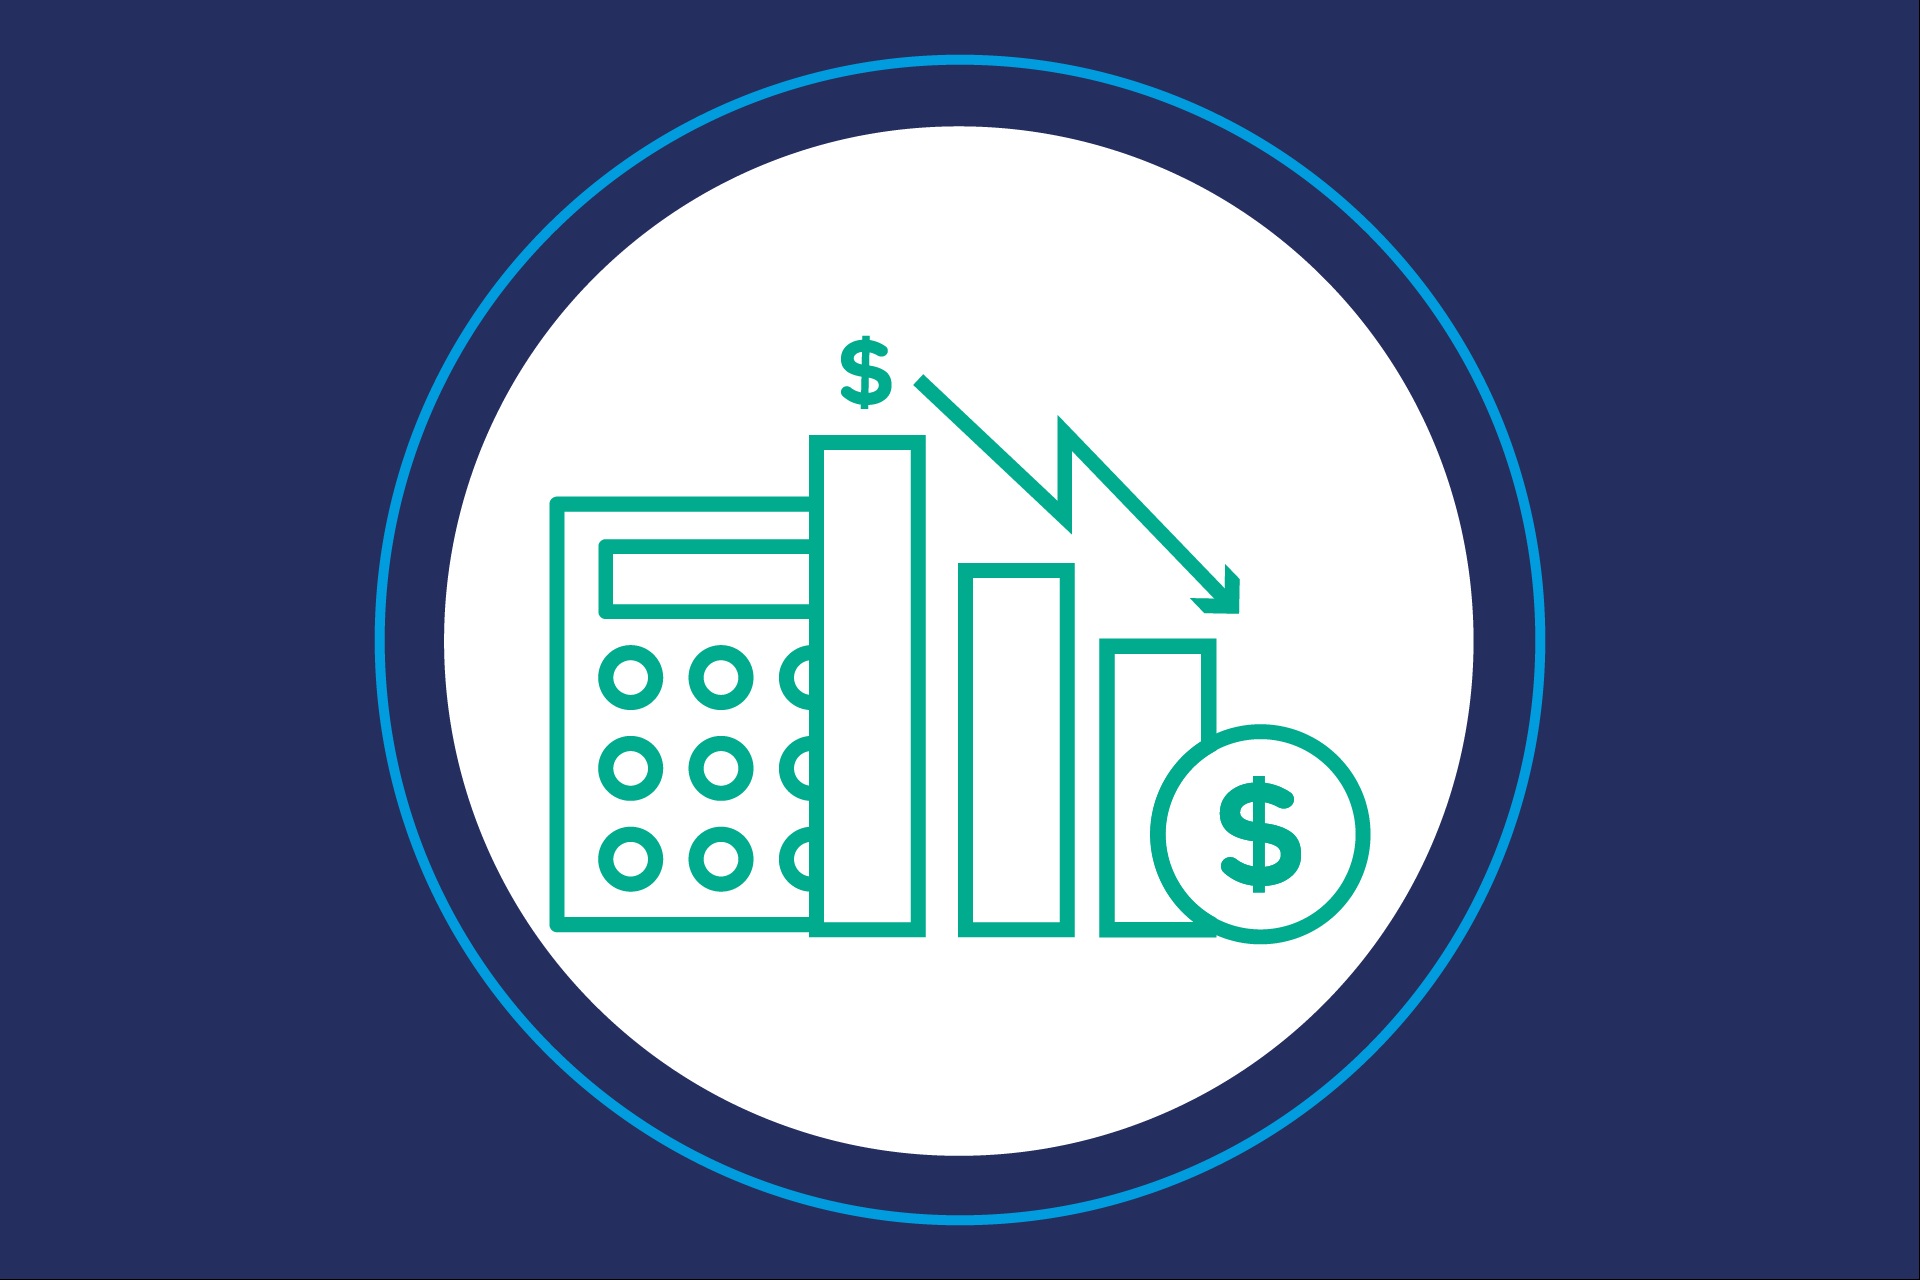 Image with a blue background and a green economics theme icon